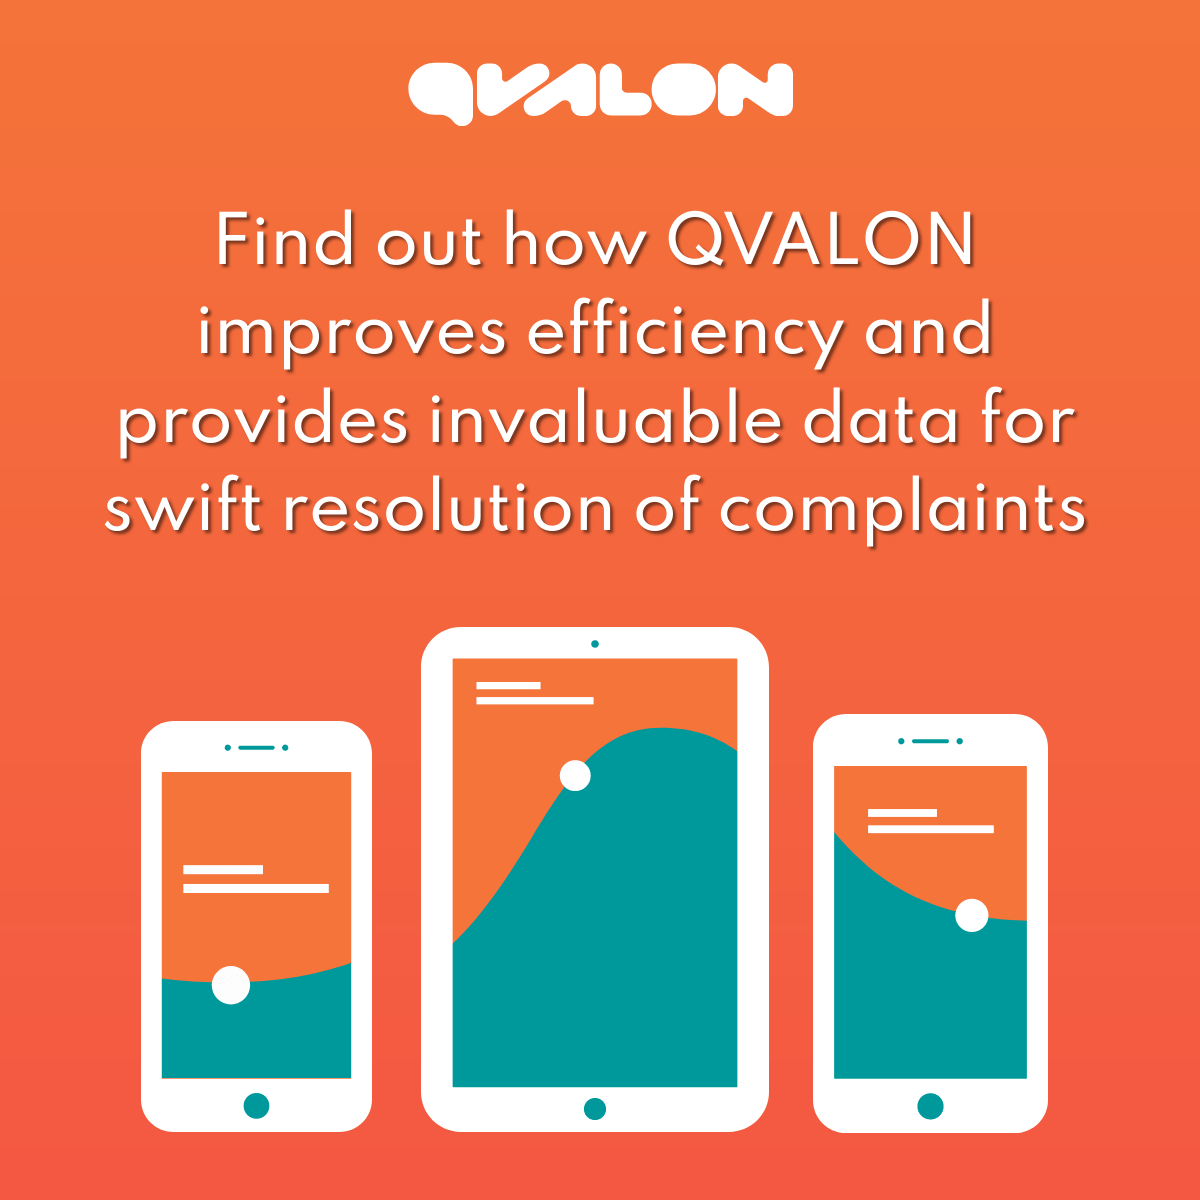 Experience efficiency with QVALON in modular construction: User-friendly and compatible with smartphones, QVALON empowers quality controllers to conduct inspections effortlessly. Learn more: bit.ly/3q8ZtBJ. #QVALON #ModularConstruction